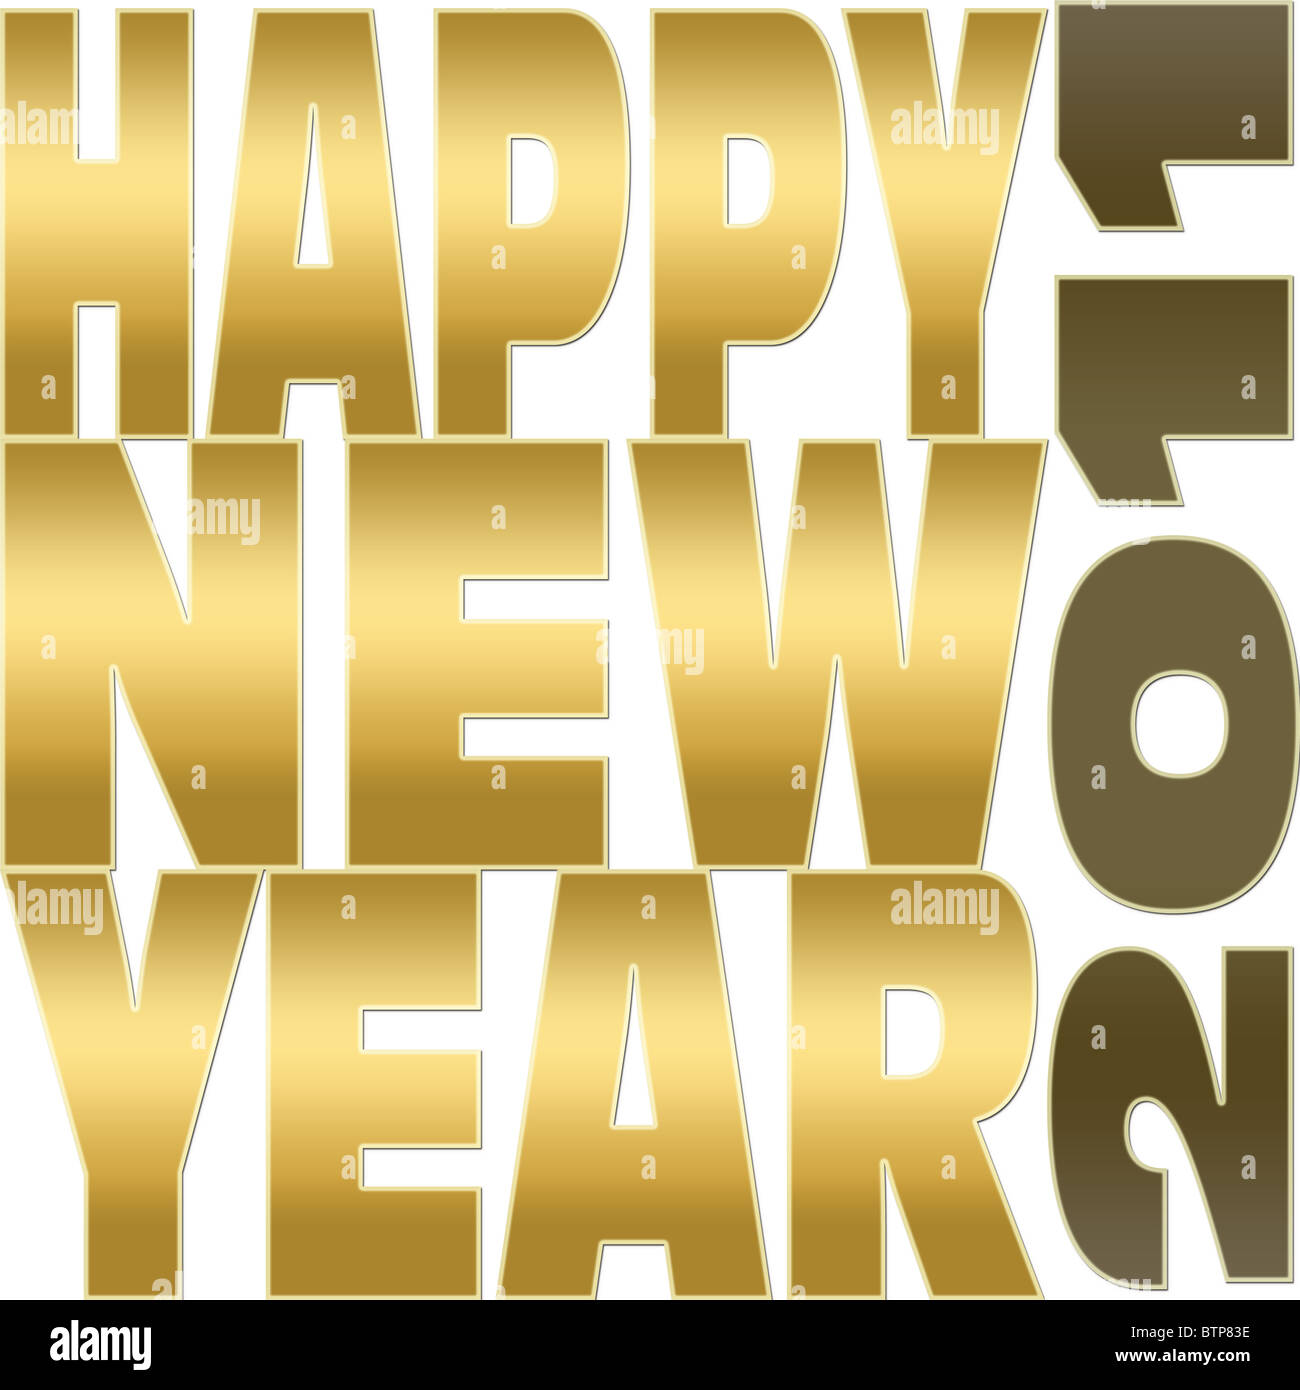 Happy new year 2011 label on white background Stock Photo